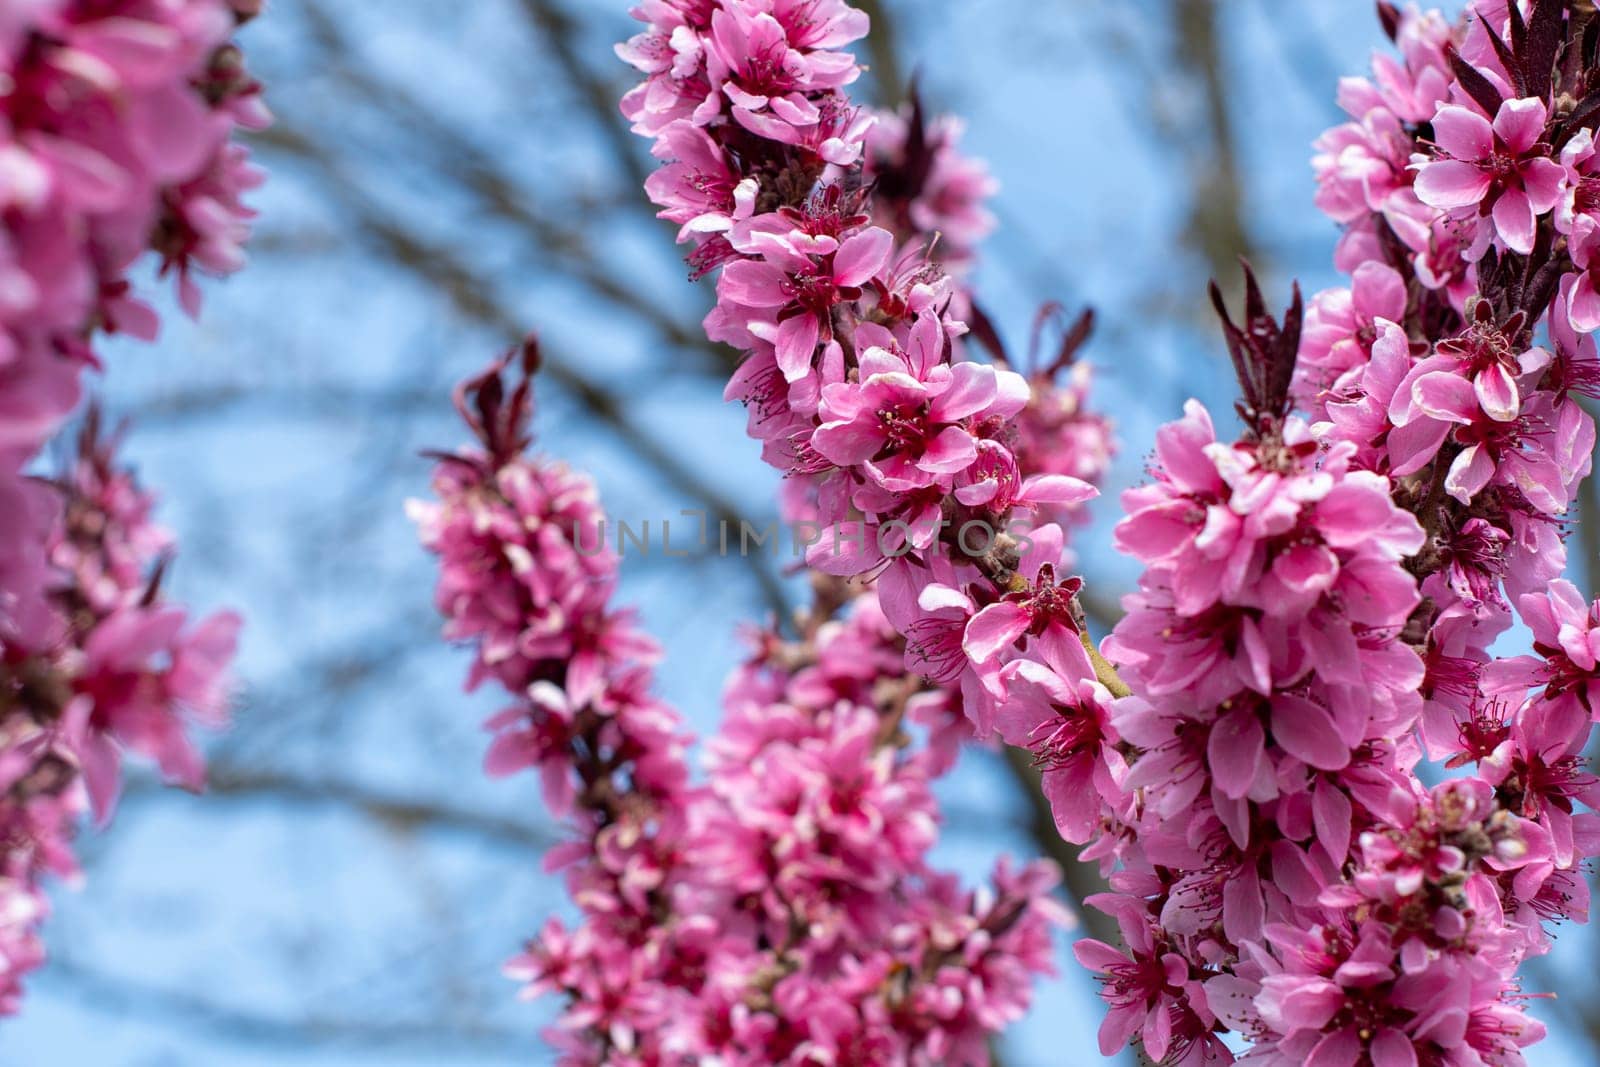 luxurious flowering peach branches, delicate pink flowers against the blue sky by KaterinaDalemans